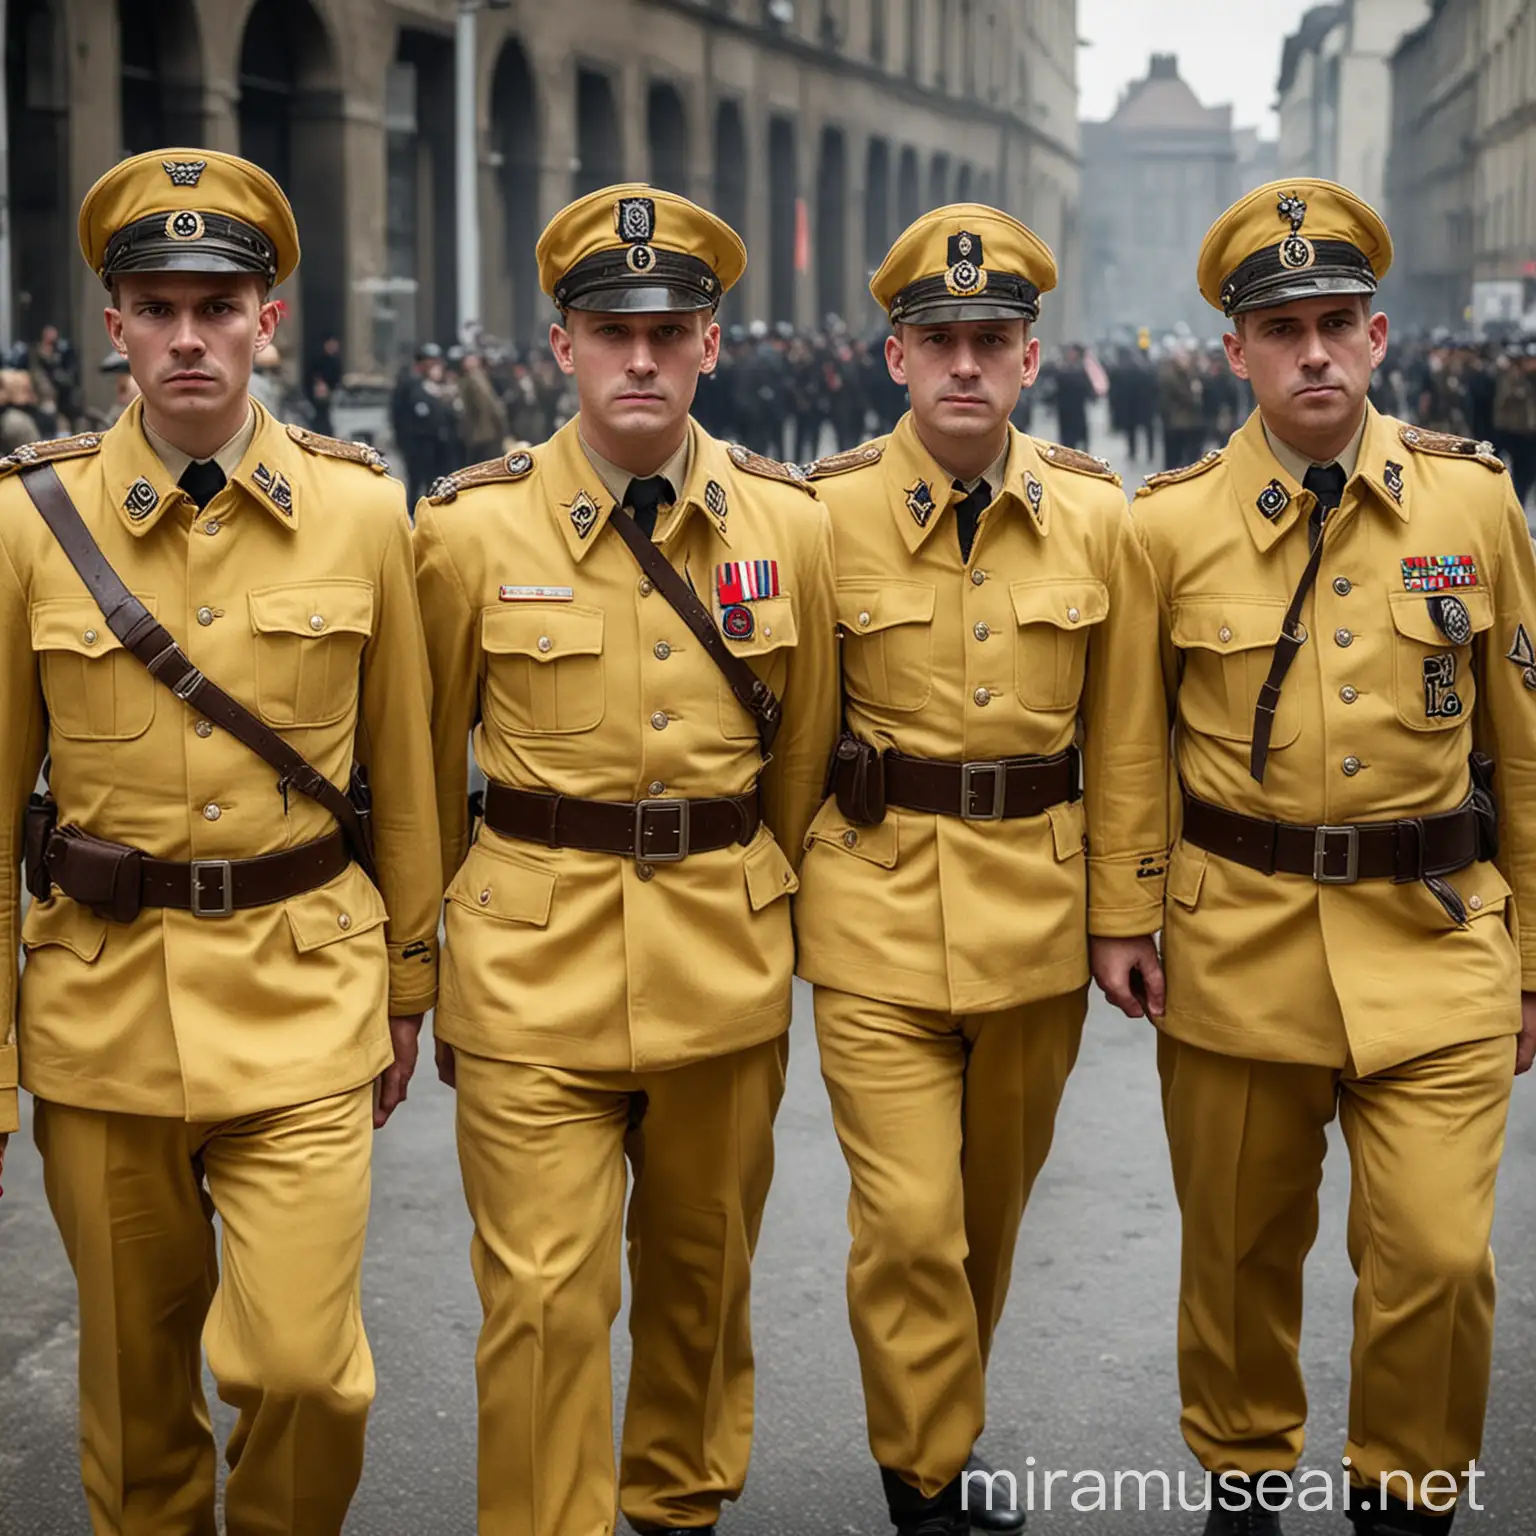 Military Officers in Yellow Uniforms Resembling Nazi Attire